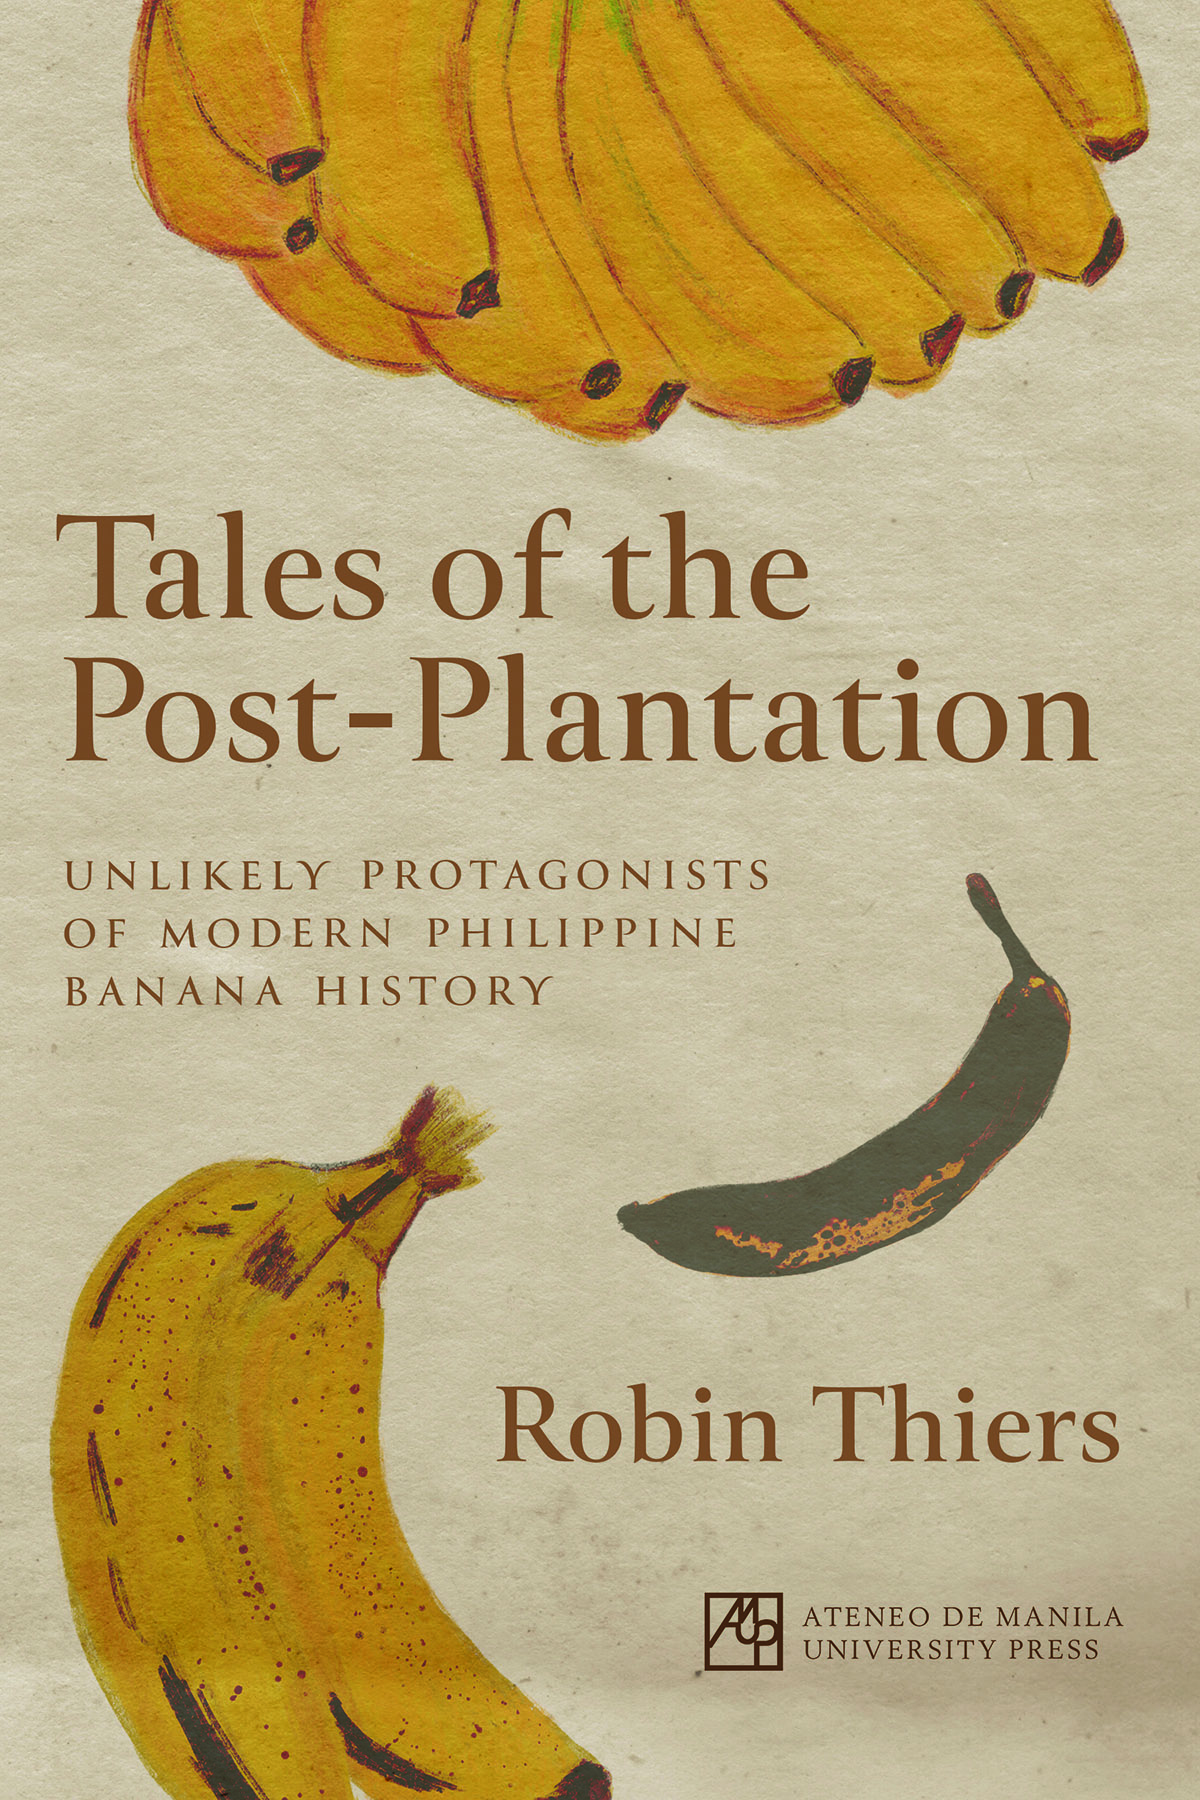 Book cover of Tales of the Post-Plantation by Robin Thiers